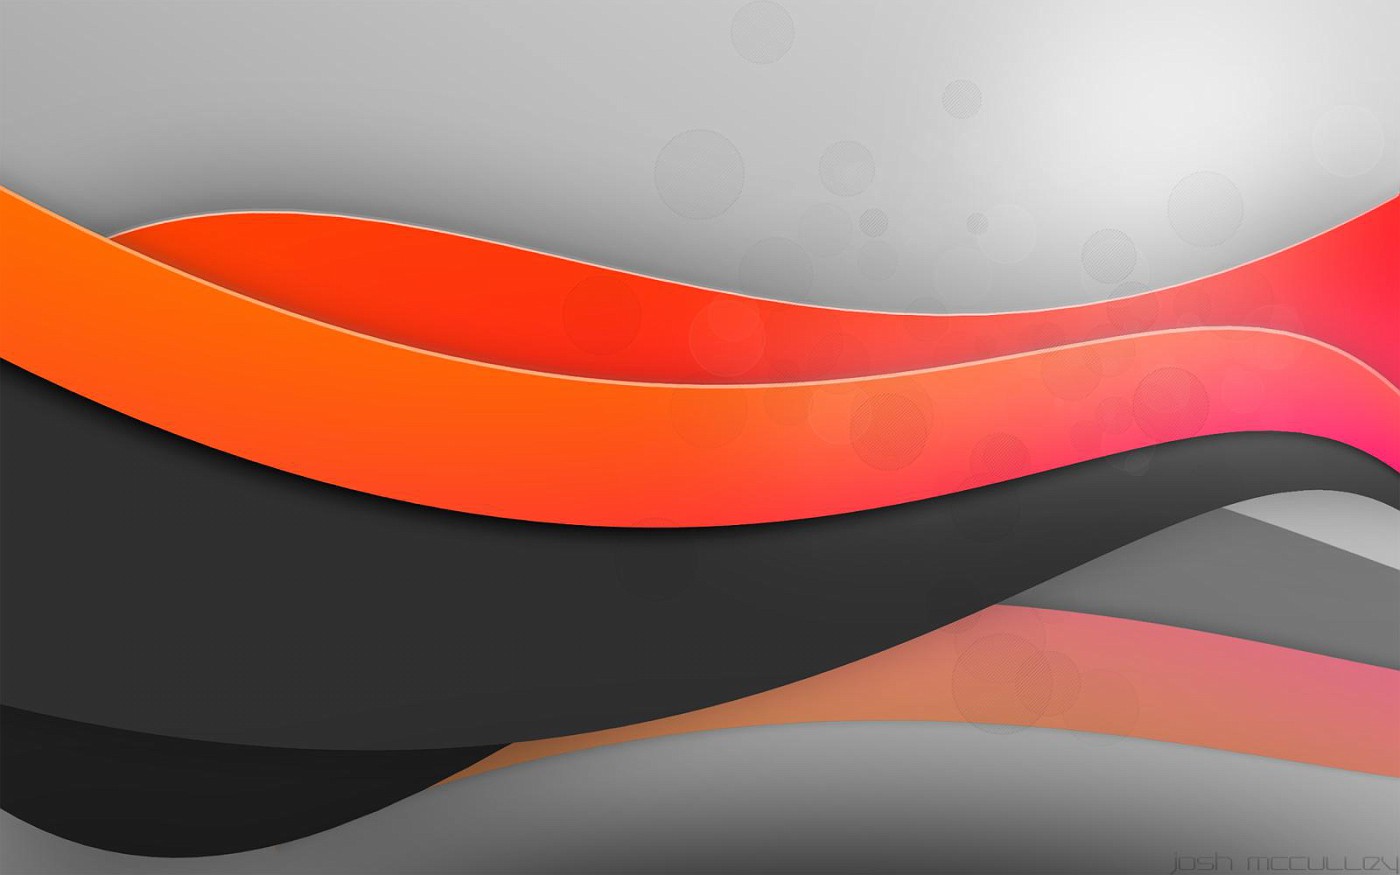 3d Abstract Comely Light Wave Notebook Wallpaper Photograph - Orange Black And Grey - HD Wallpaper 